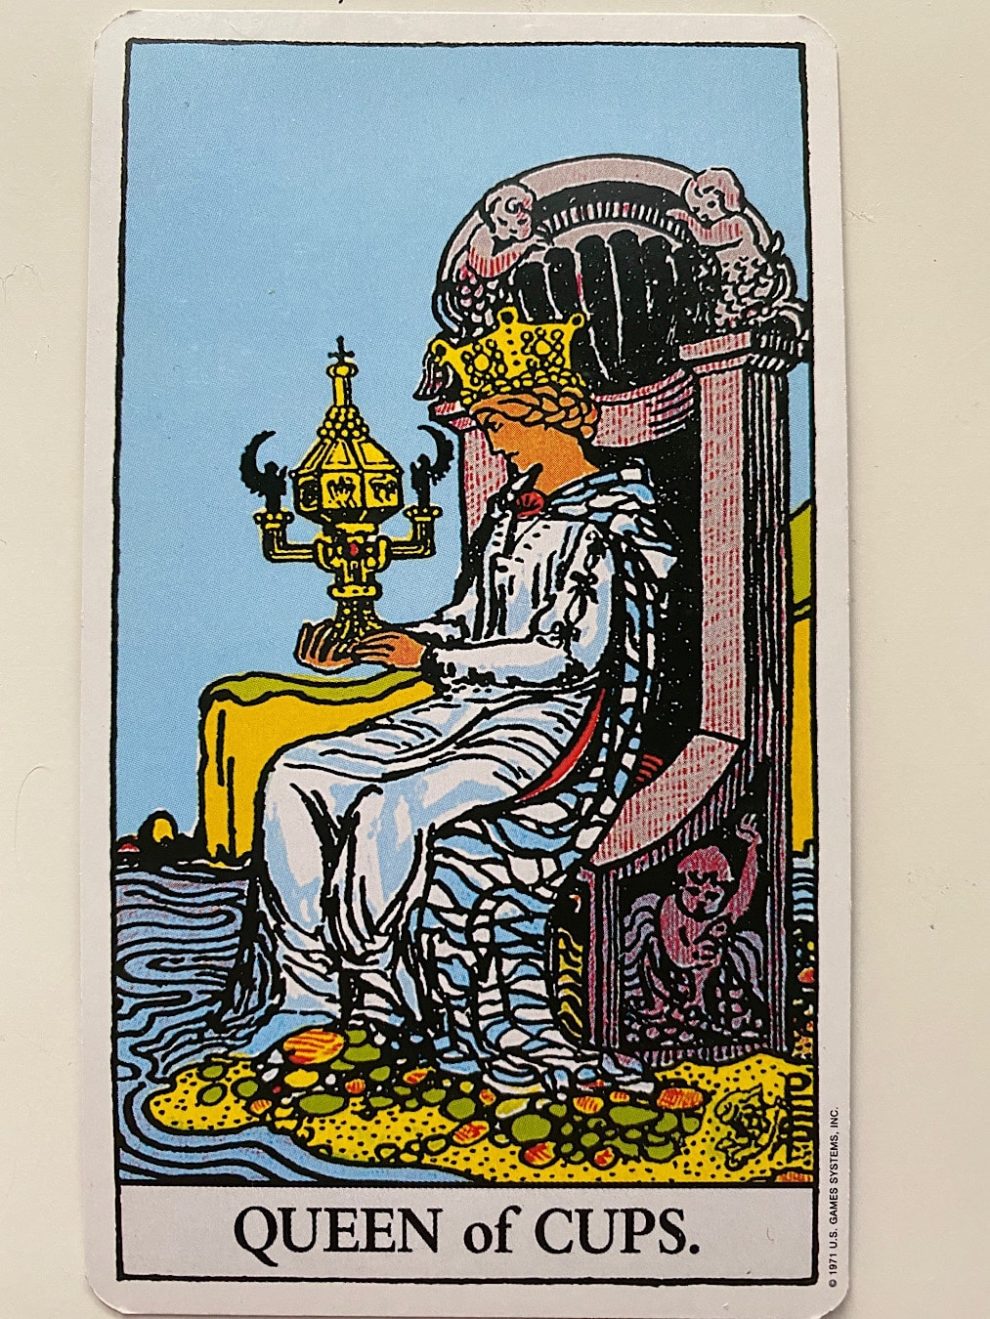 The Queen of Cups as Feelings